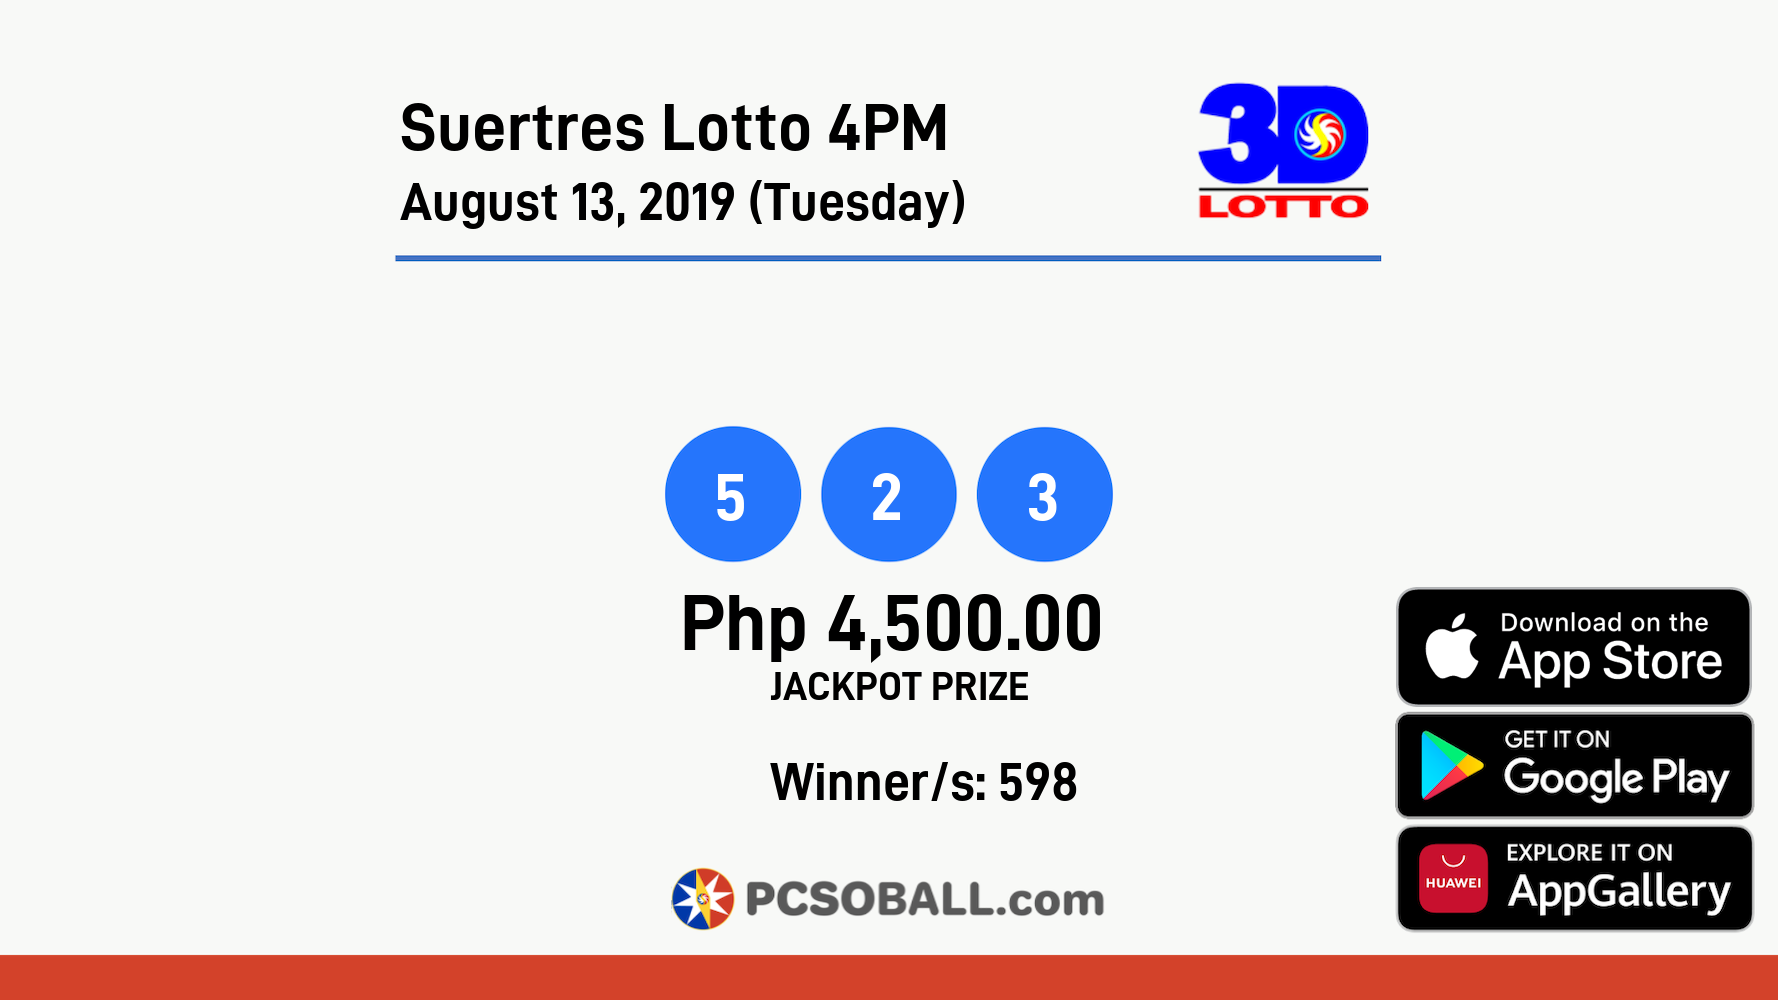 Suertres Lotto 4PM August 13, 2019 (Tuesday) Result